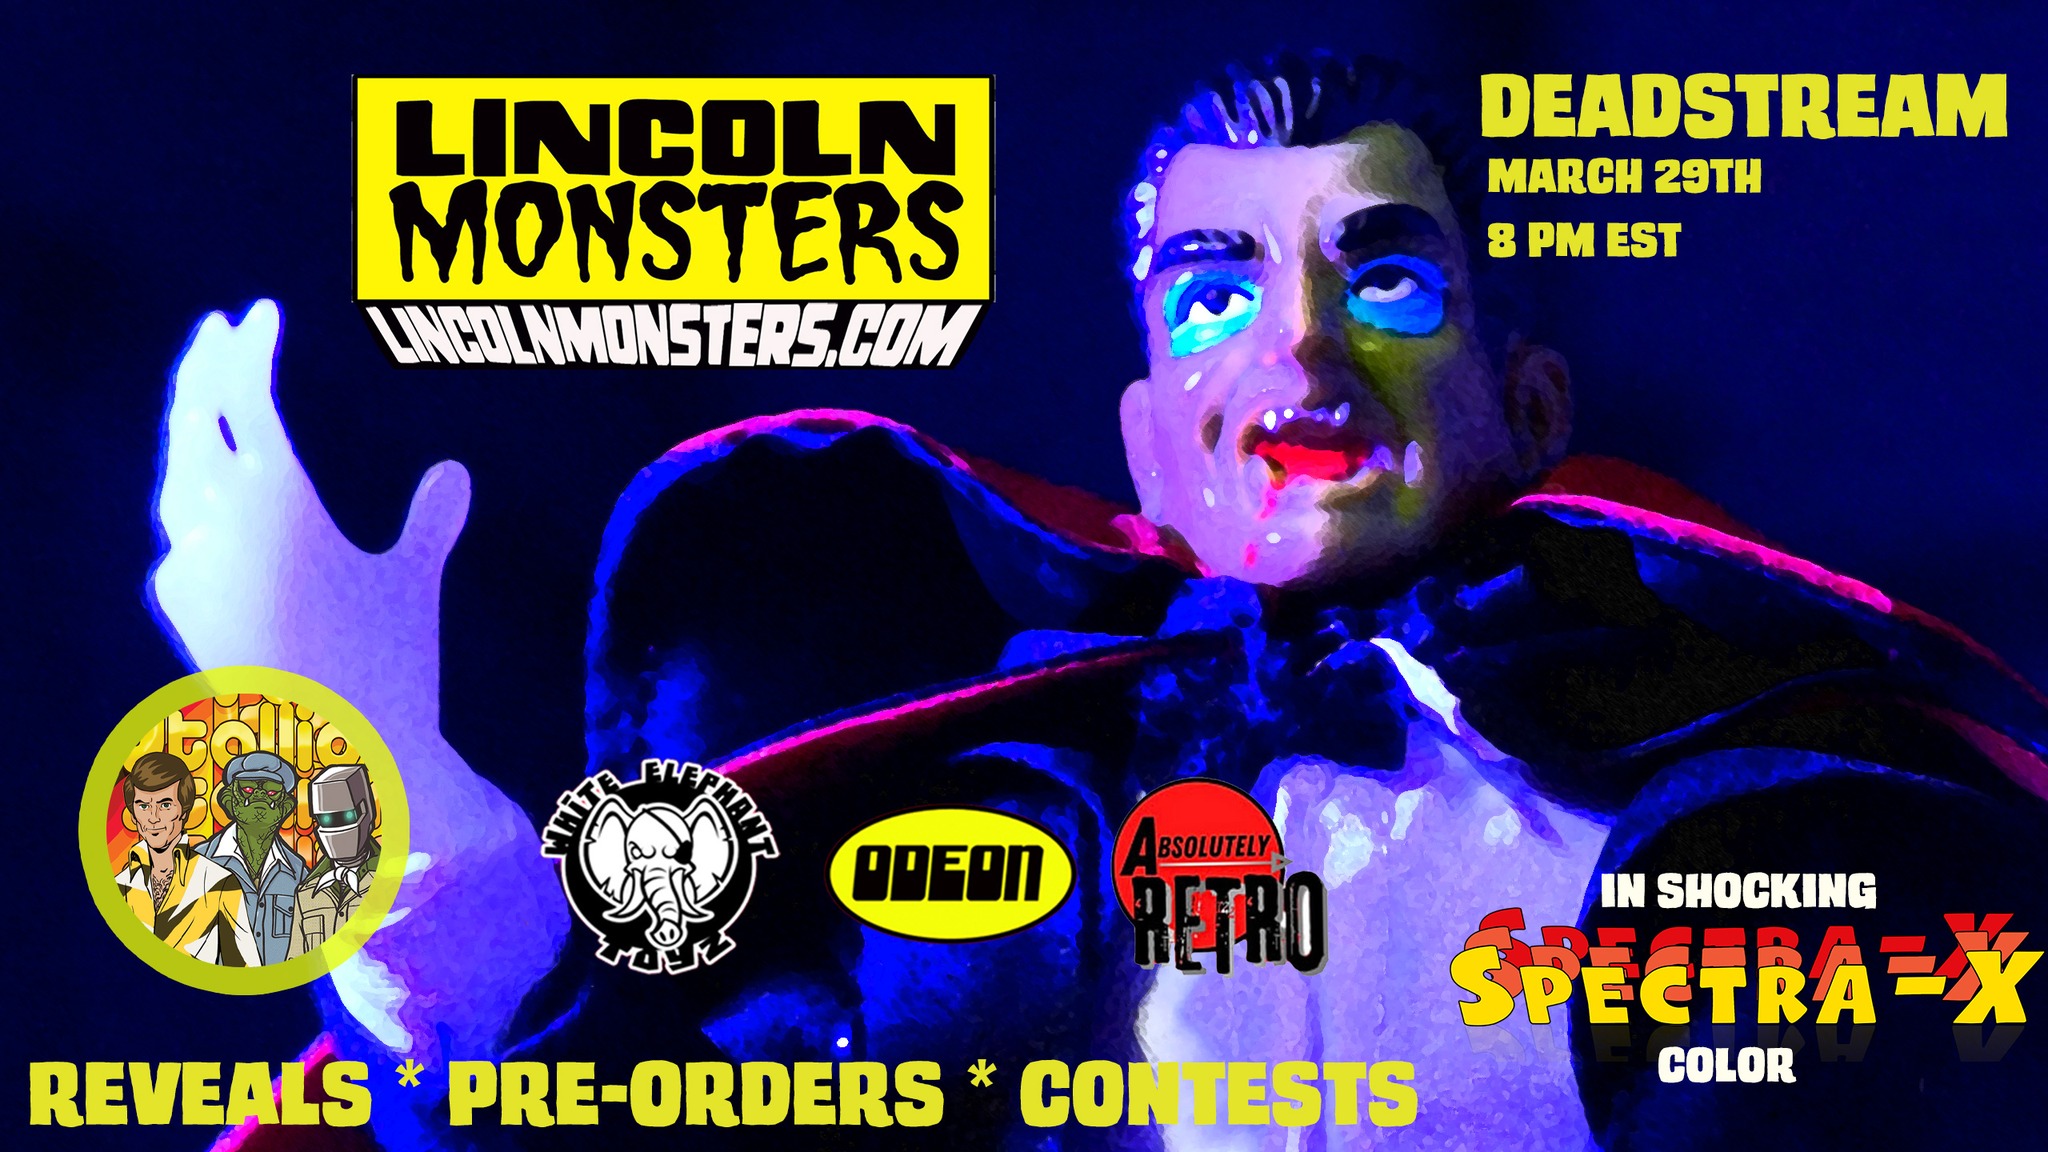 Lincoln Monsters DEADSTREAM Friday March 29th